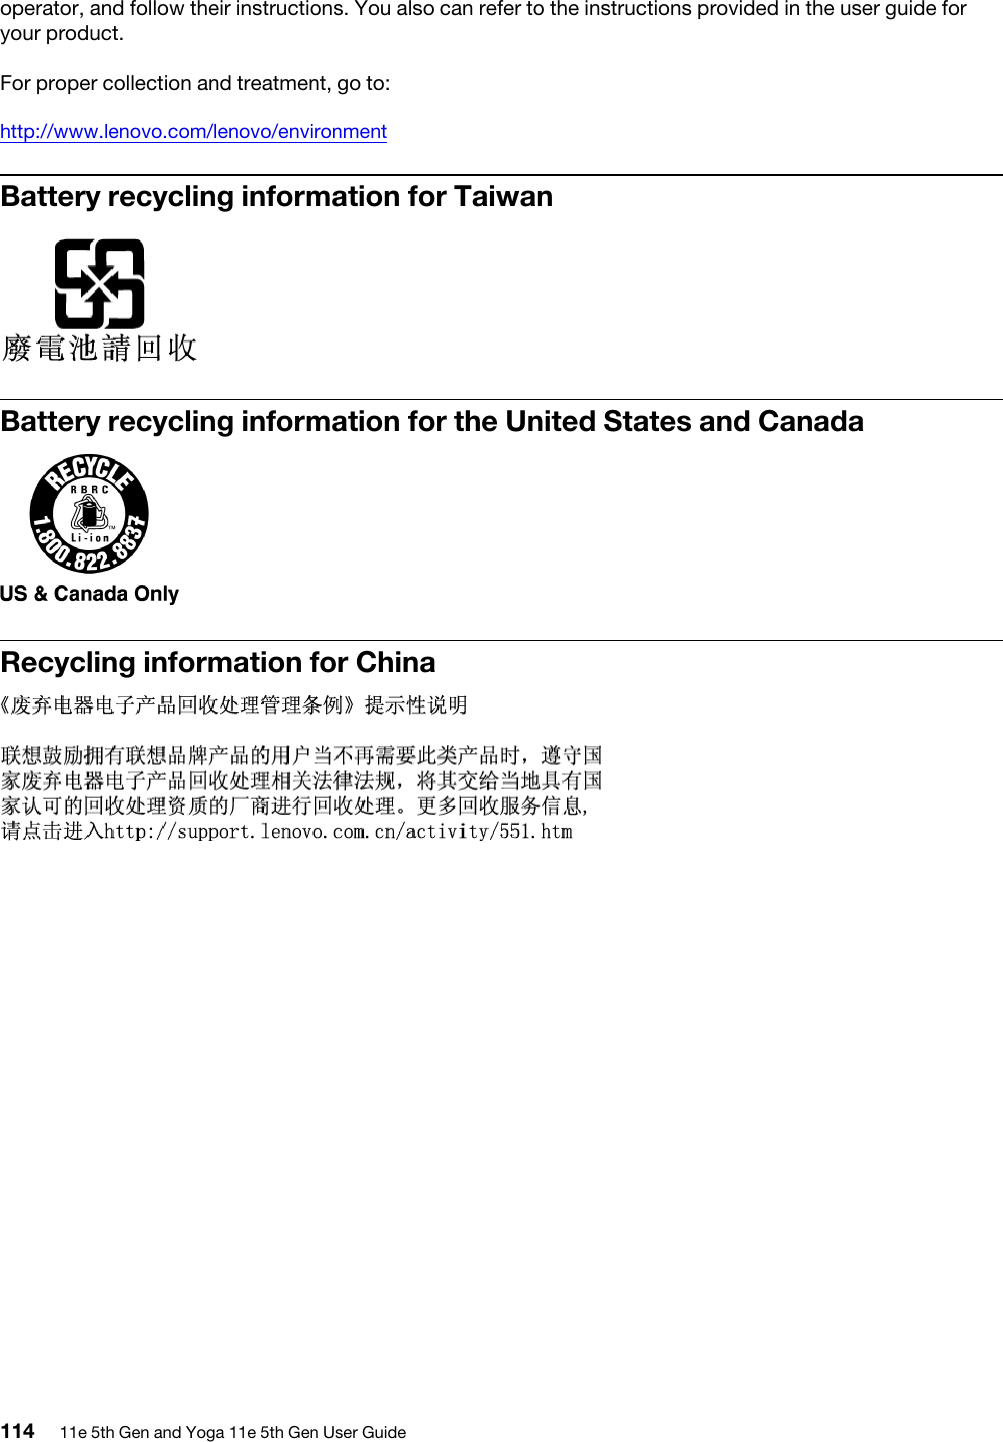 operator, and follow their instructions. You also can refer to the instructions provided in the user guide for your product.For proper collection and treatment, go to:http://www.lenovo.com/lenovo/environmentBattery recycling information for TaiwanBattery recycling information for the United States and CanadaRecycling information for China114 11e 5th Gen and Yoga 11e 5th Gen User Guide